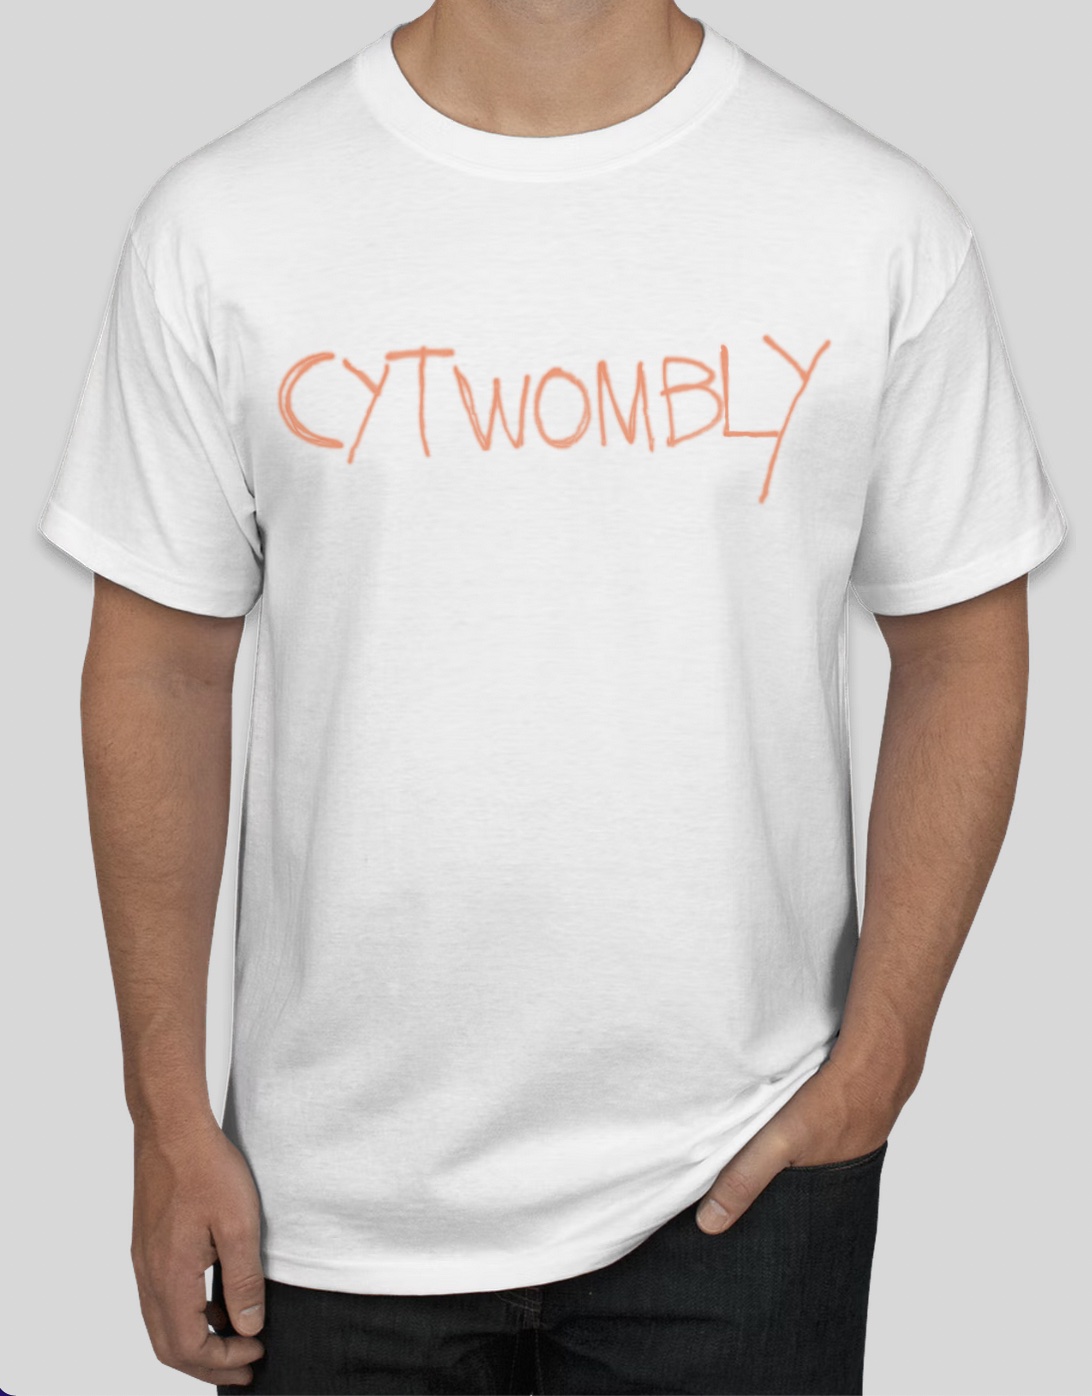 Cy Twombly Tag T-shirt